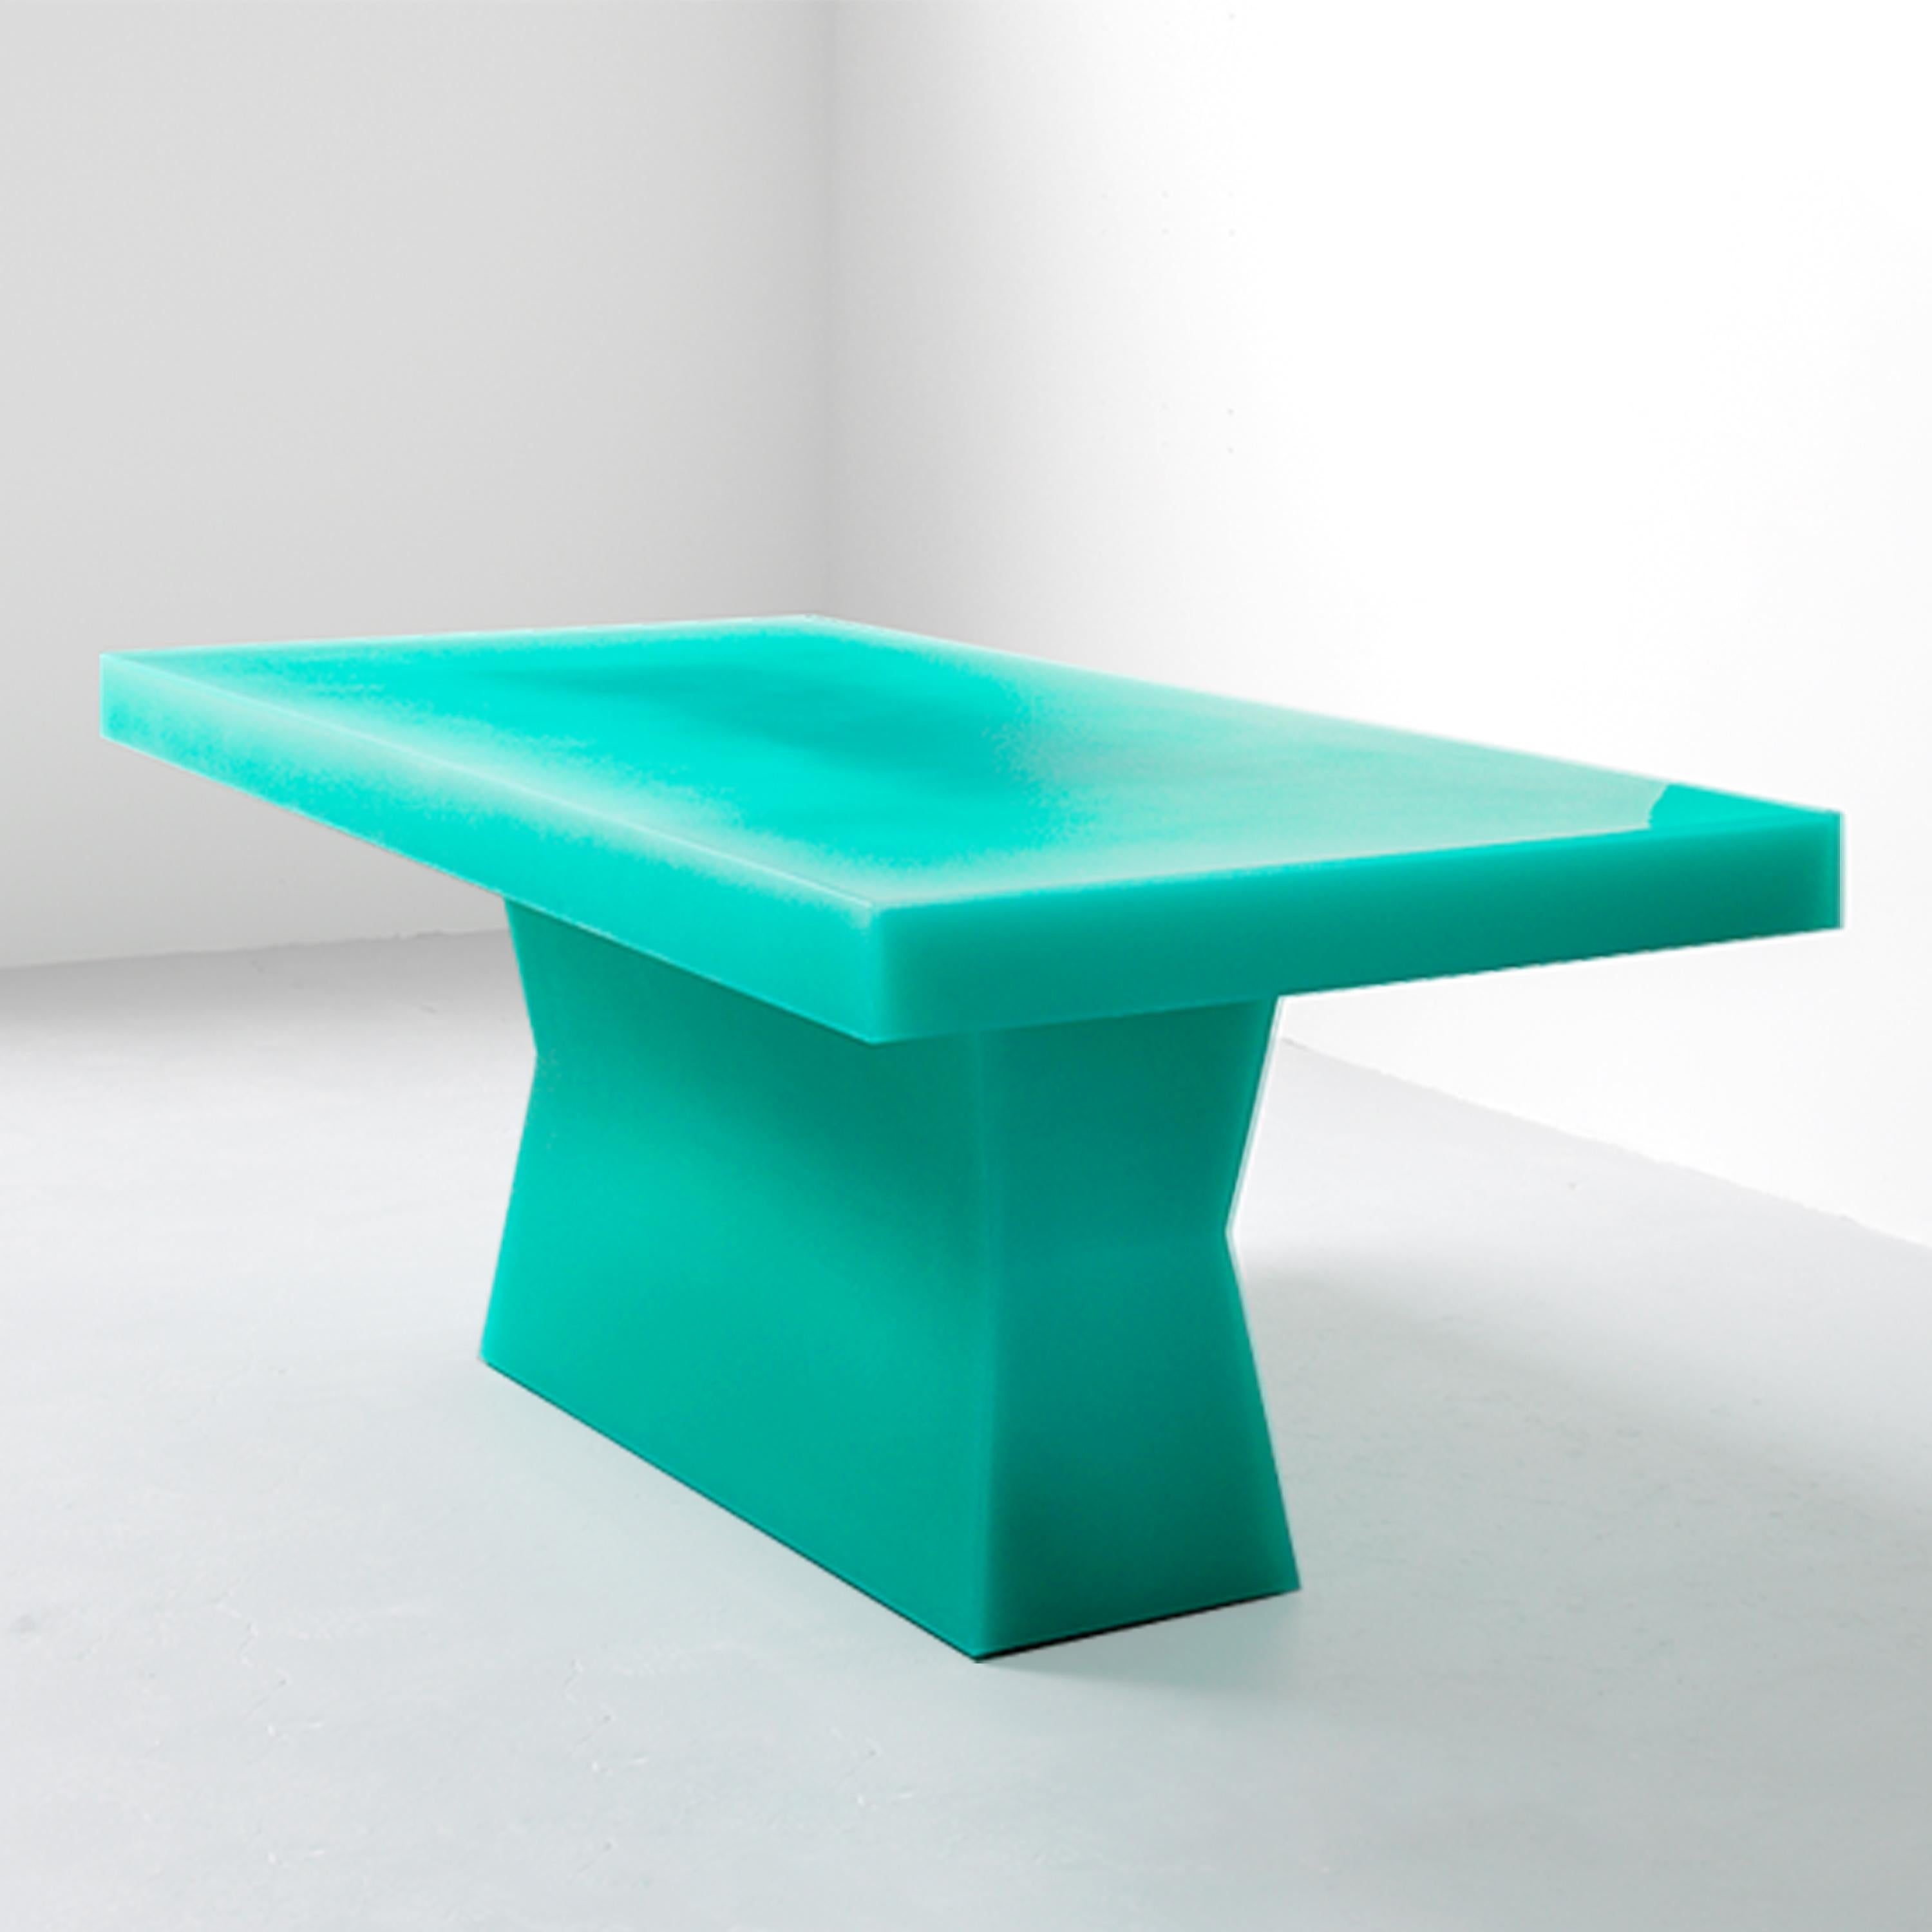 Pool Resin Dining Table in Turquoise by Facture Studio, REP by Tuleste Factory In New Condition For Sale In New York, NY